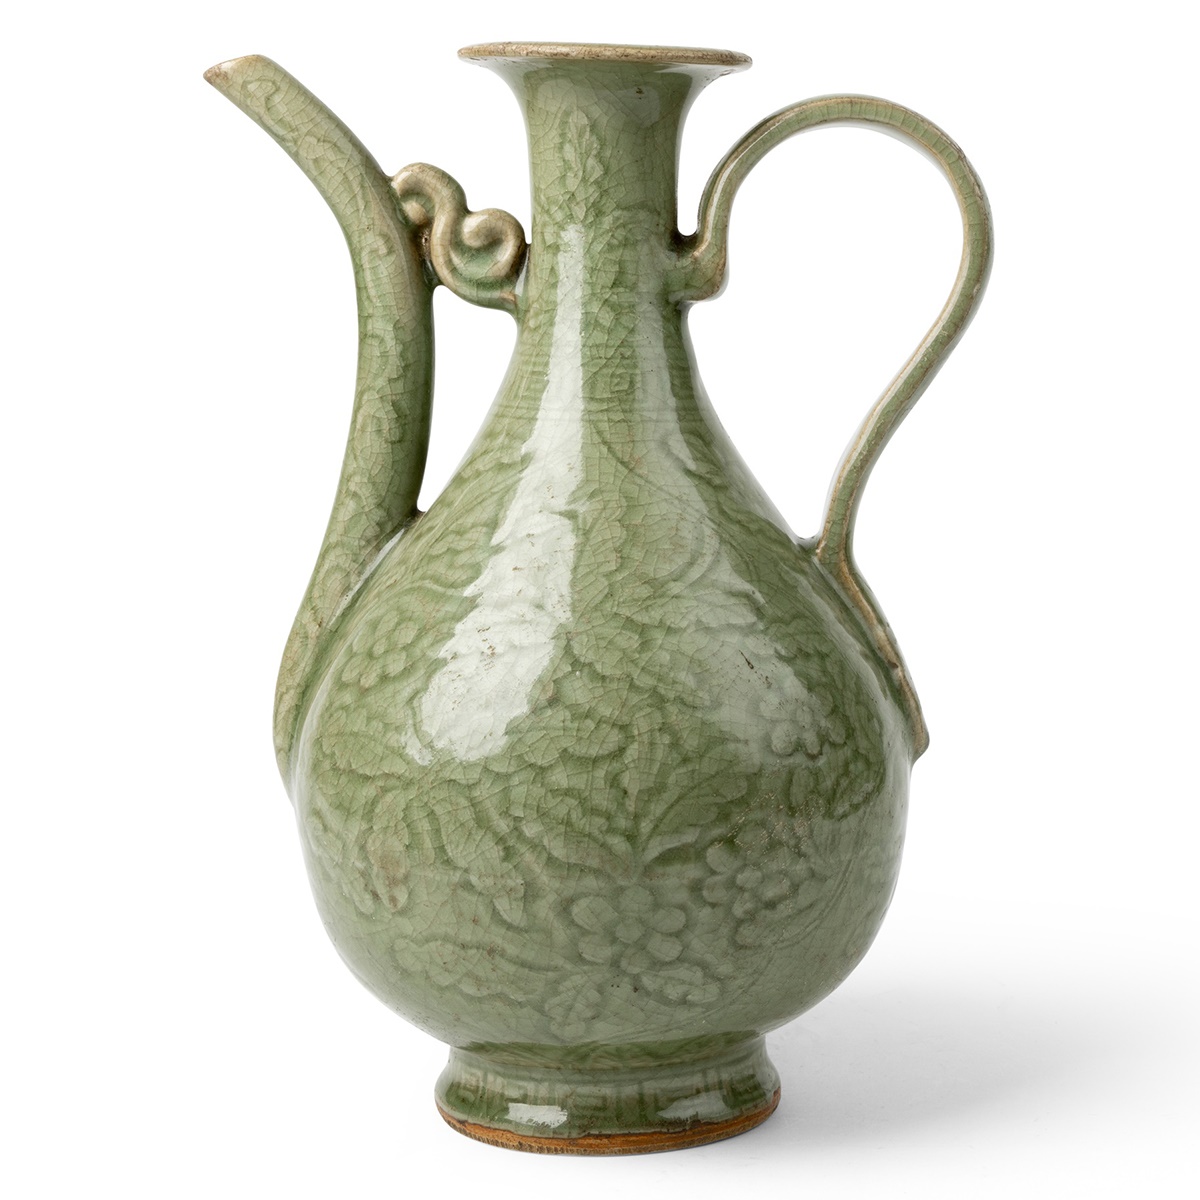 LOT 92 | LONGQUAN CELADON-GLAZED CARVED 'FLORAL' EWER | MING DYNASTY OR LATER 明或以後 龍泉青釉刻花執壺 | £2,000 - £3,000 + fees